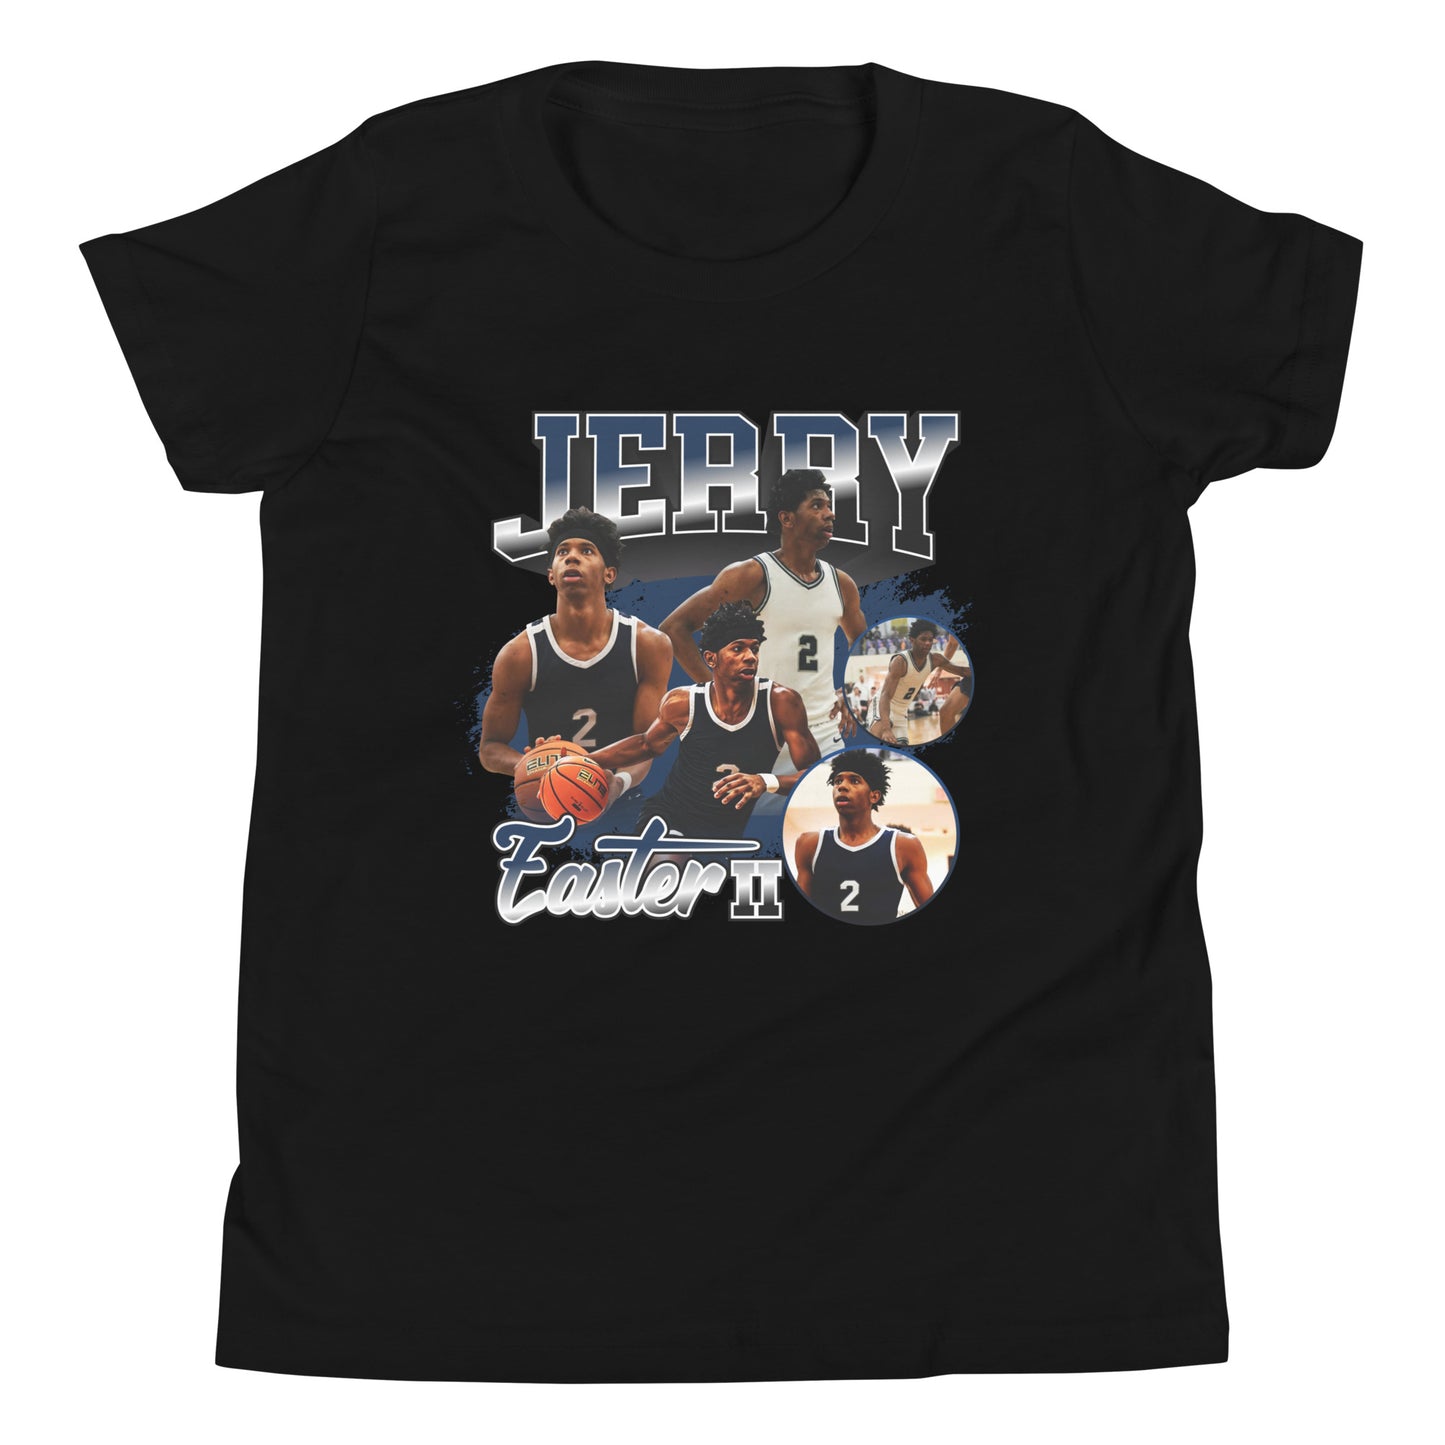 Jerry Easter "Vintage" Youth T-Shirt - Fan Arch